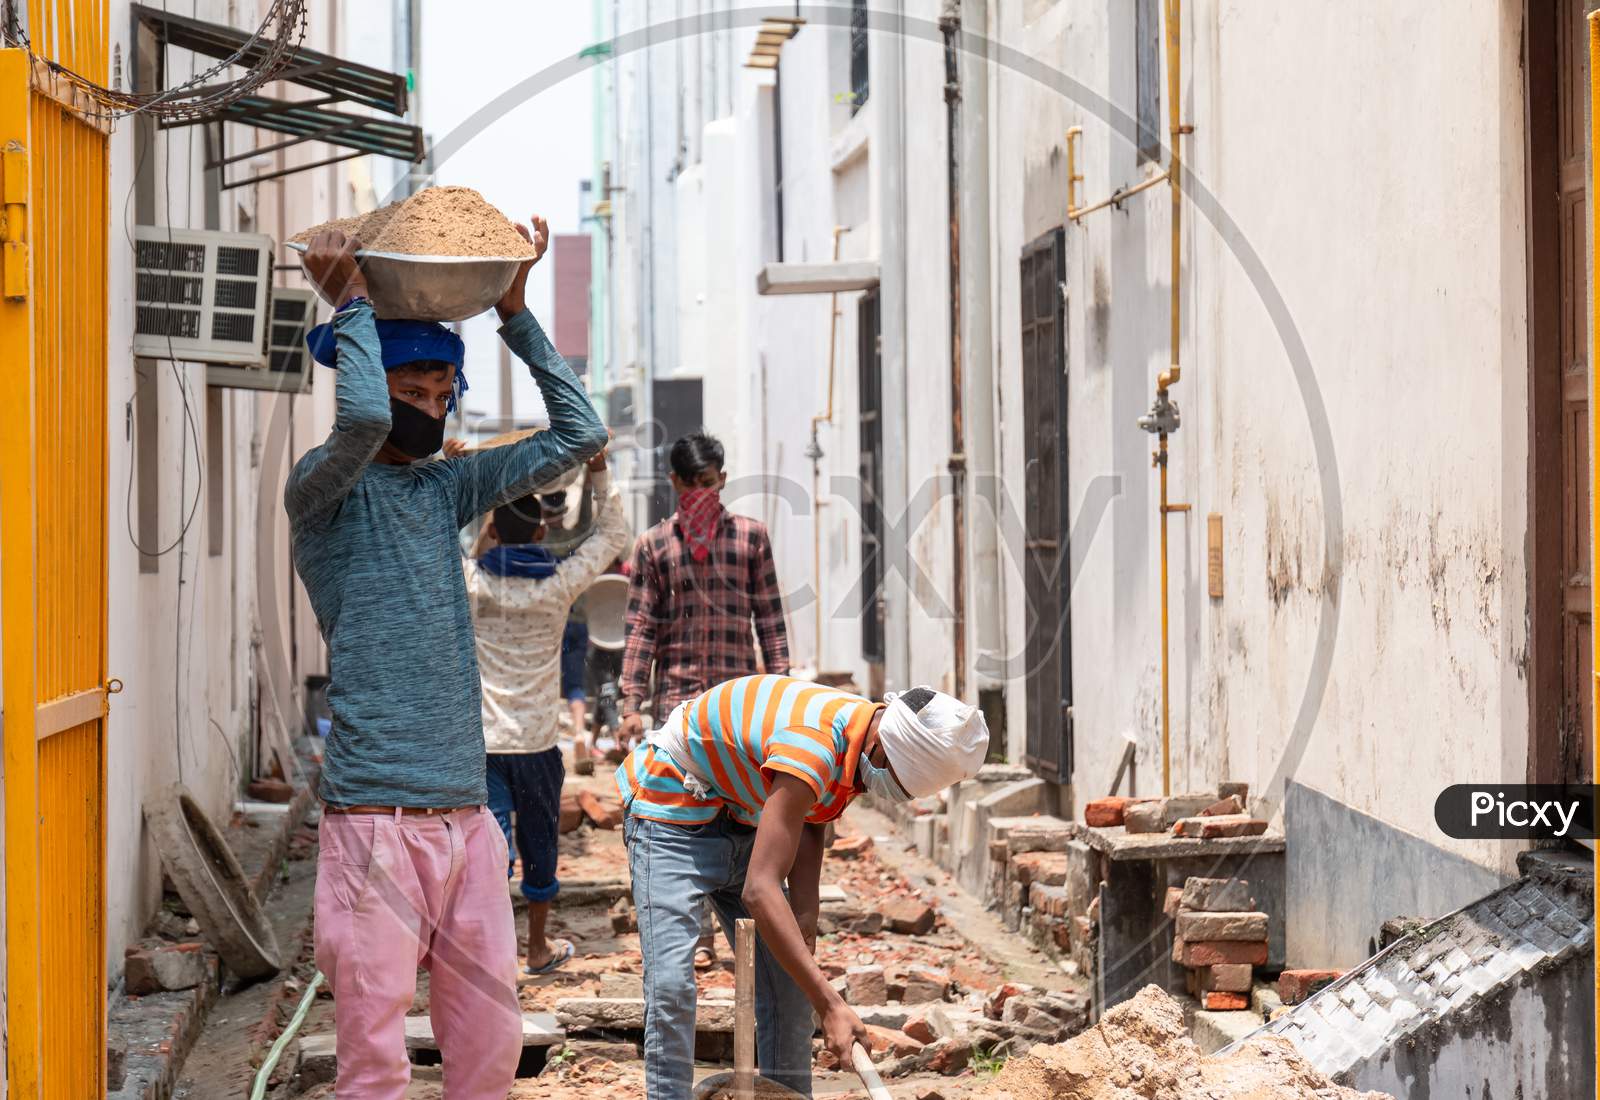 Indian labor with Medical Mask at Construction Site during Unlock down India